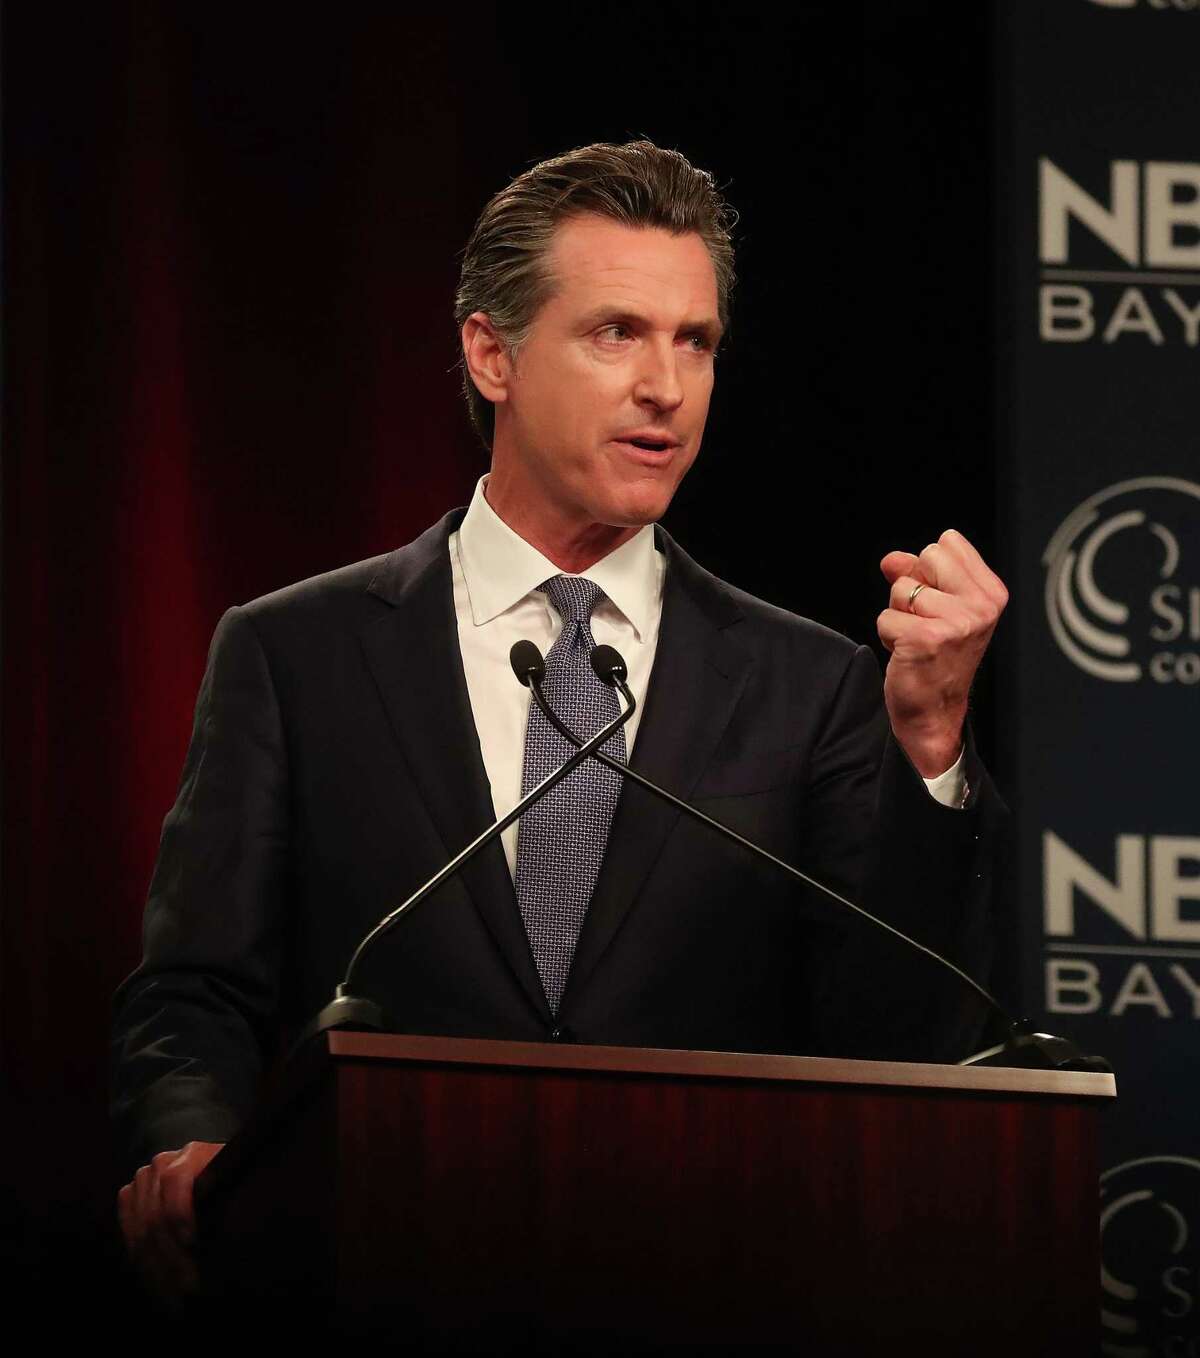 Democratic candidate Gavin Newsom takes part in the âDecision 2018: The Race for Governorâ debate at the California Theatre on Tuesday, May 8, 2018, in San Jose, Calif. (Aric Crabb/Bay Area News Group)